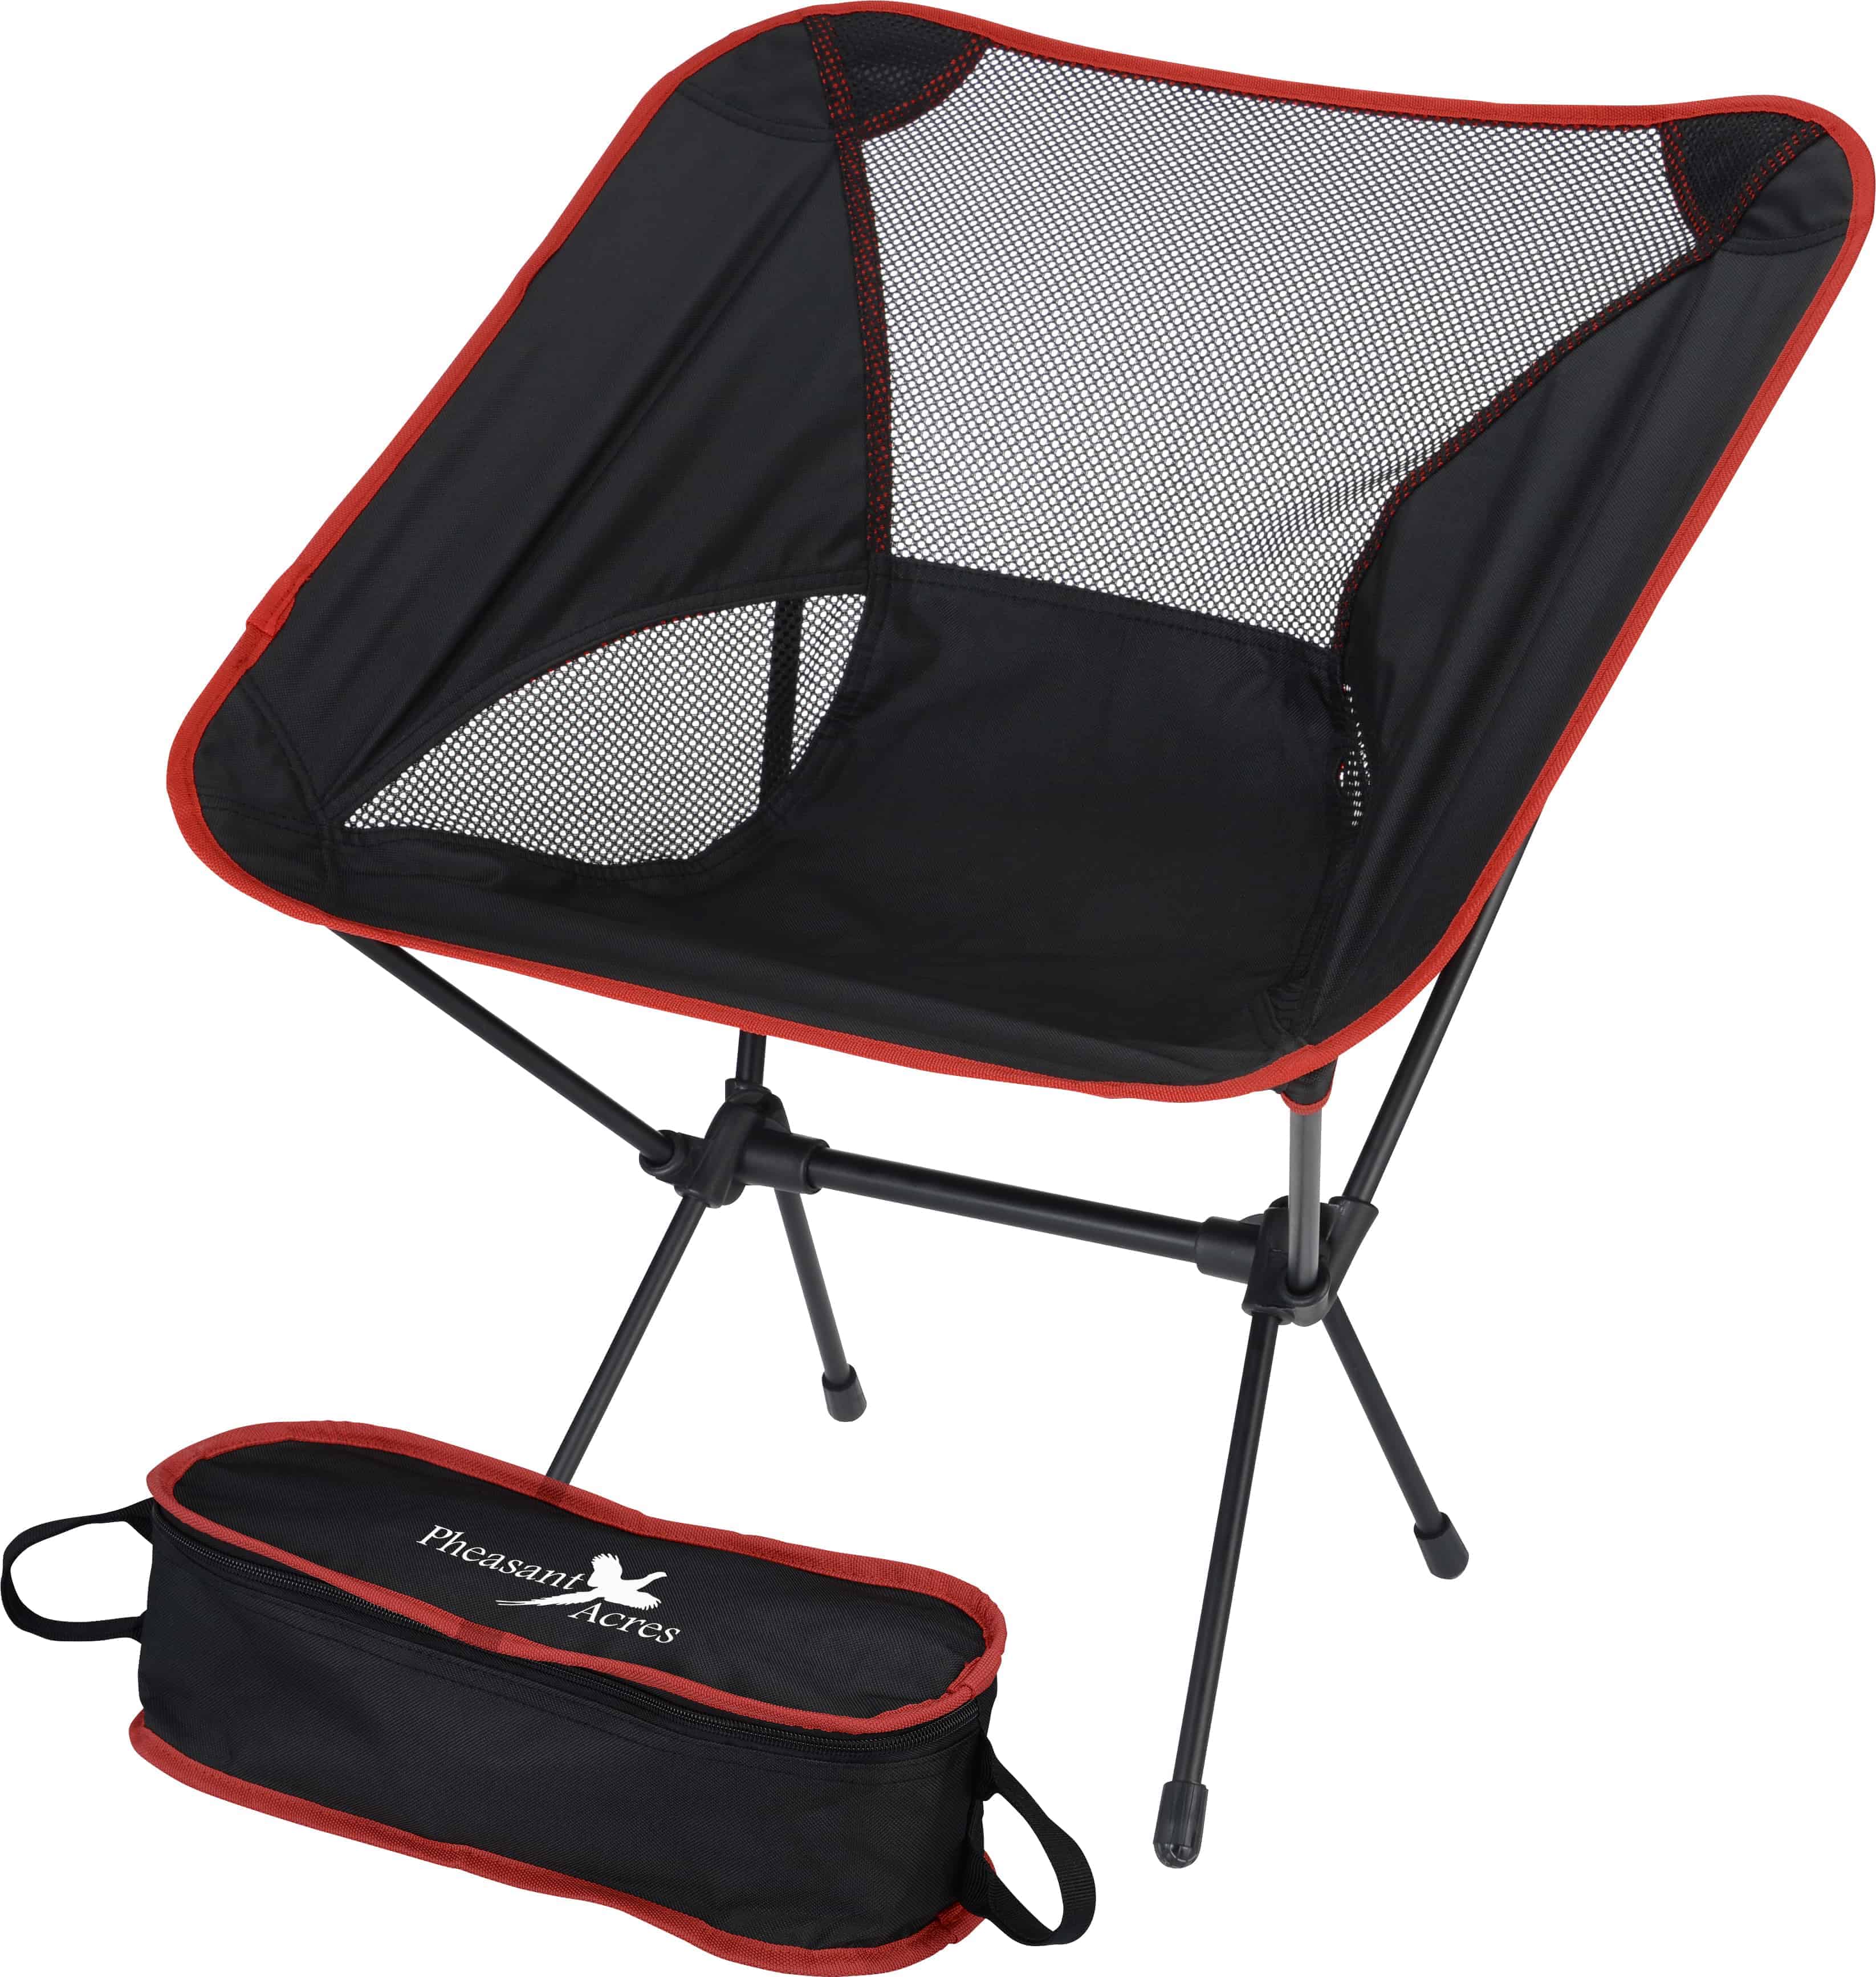 An Outdoor Folding Chair with Travel Bag.